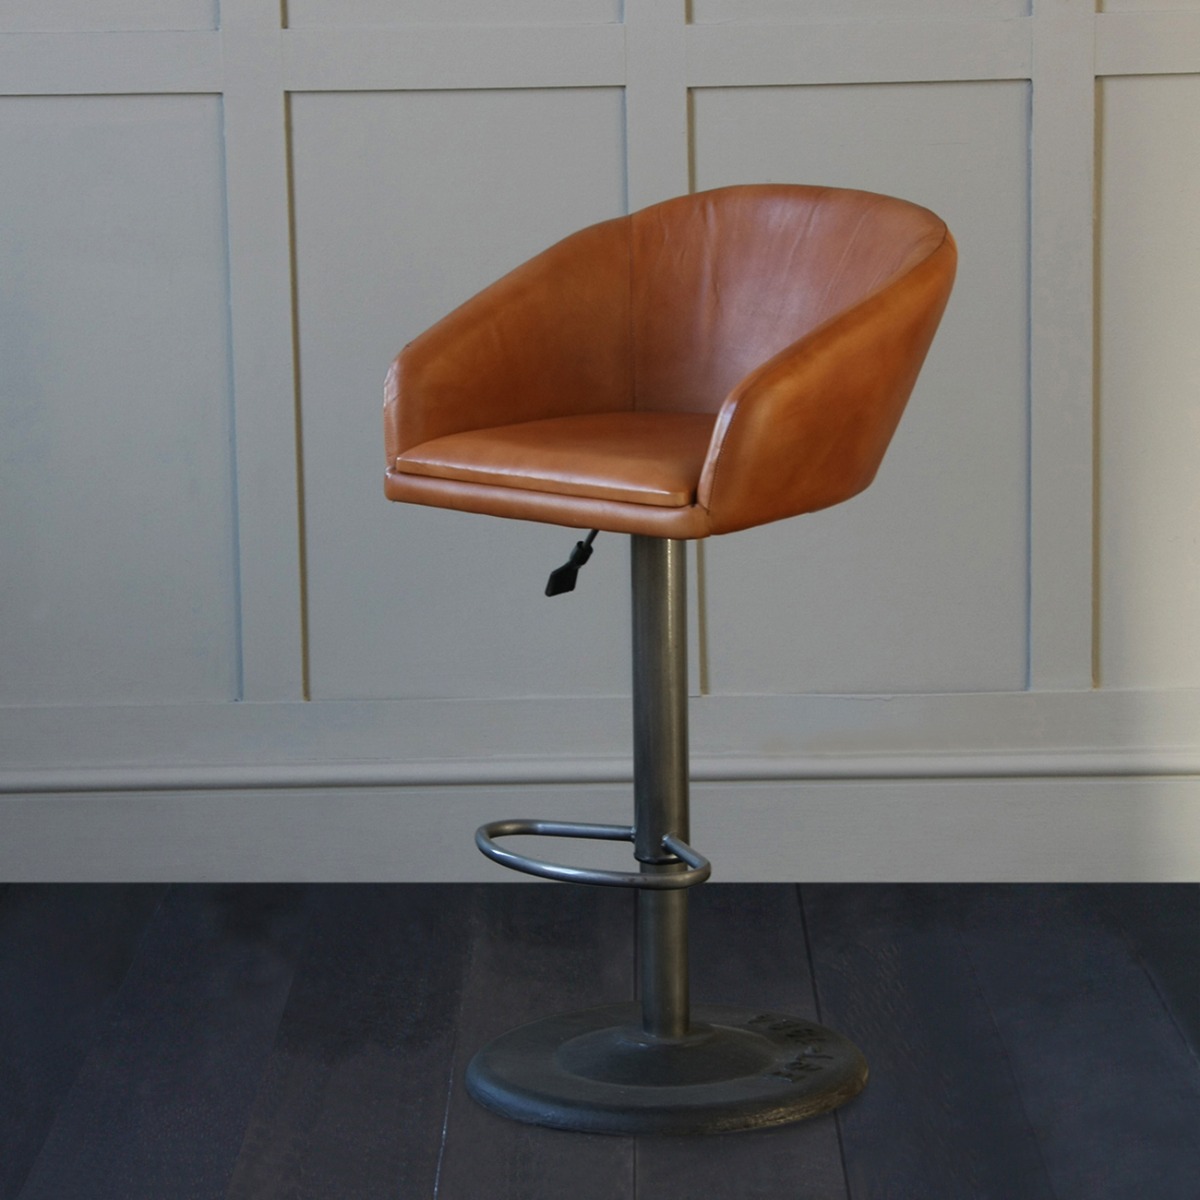 Our Club Bar Stools are great options if you're in need of a rock solid base for your bar dwellers